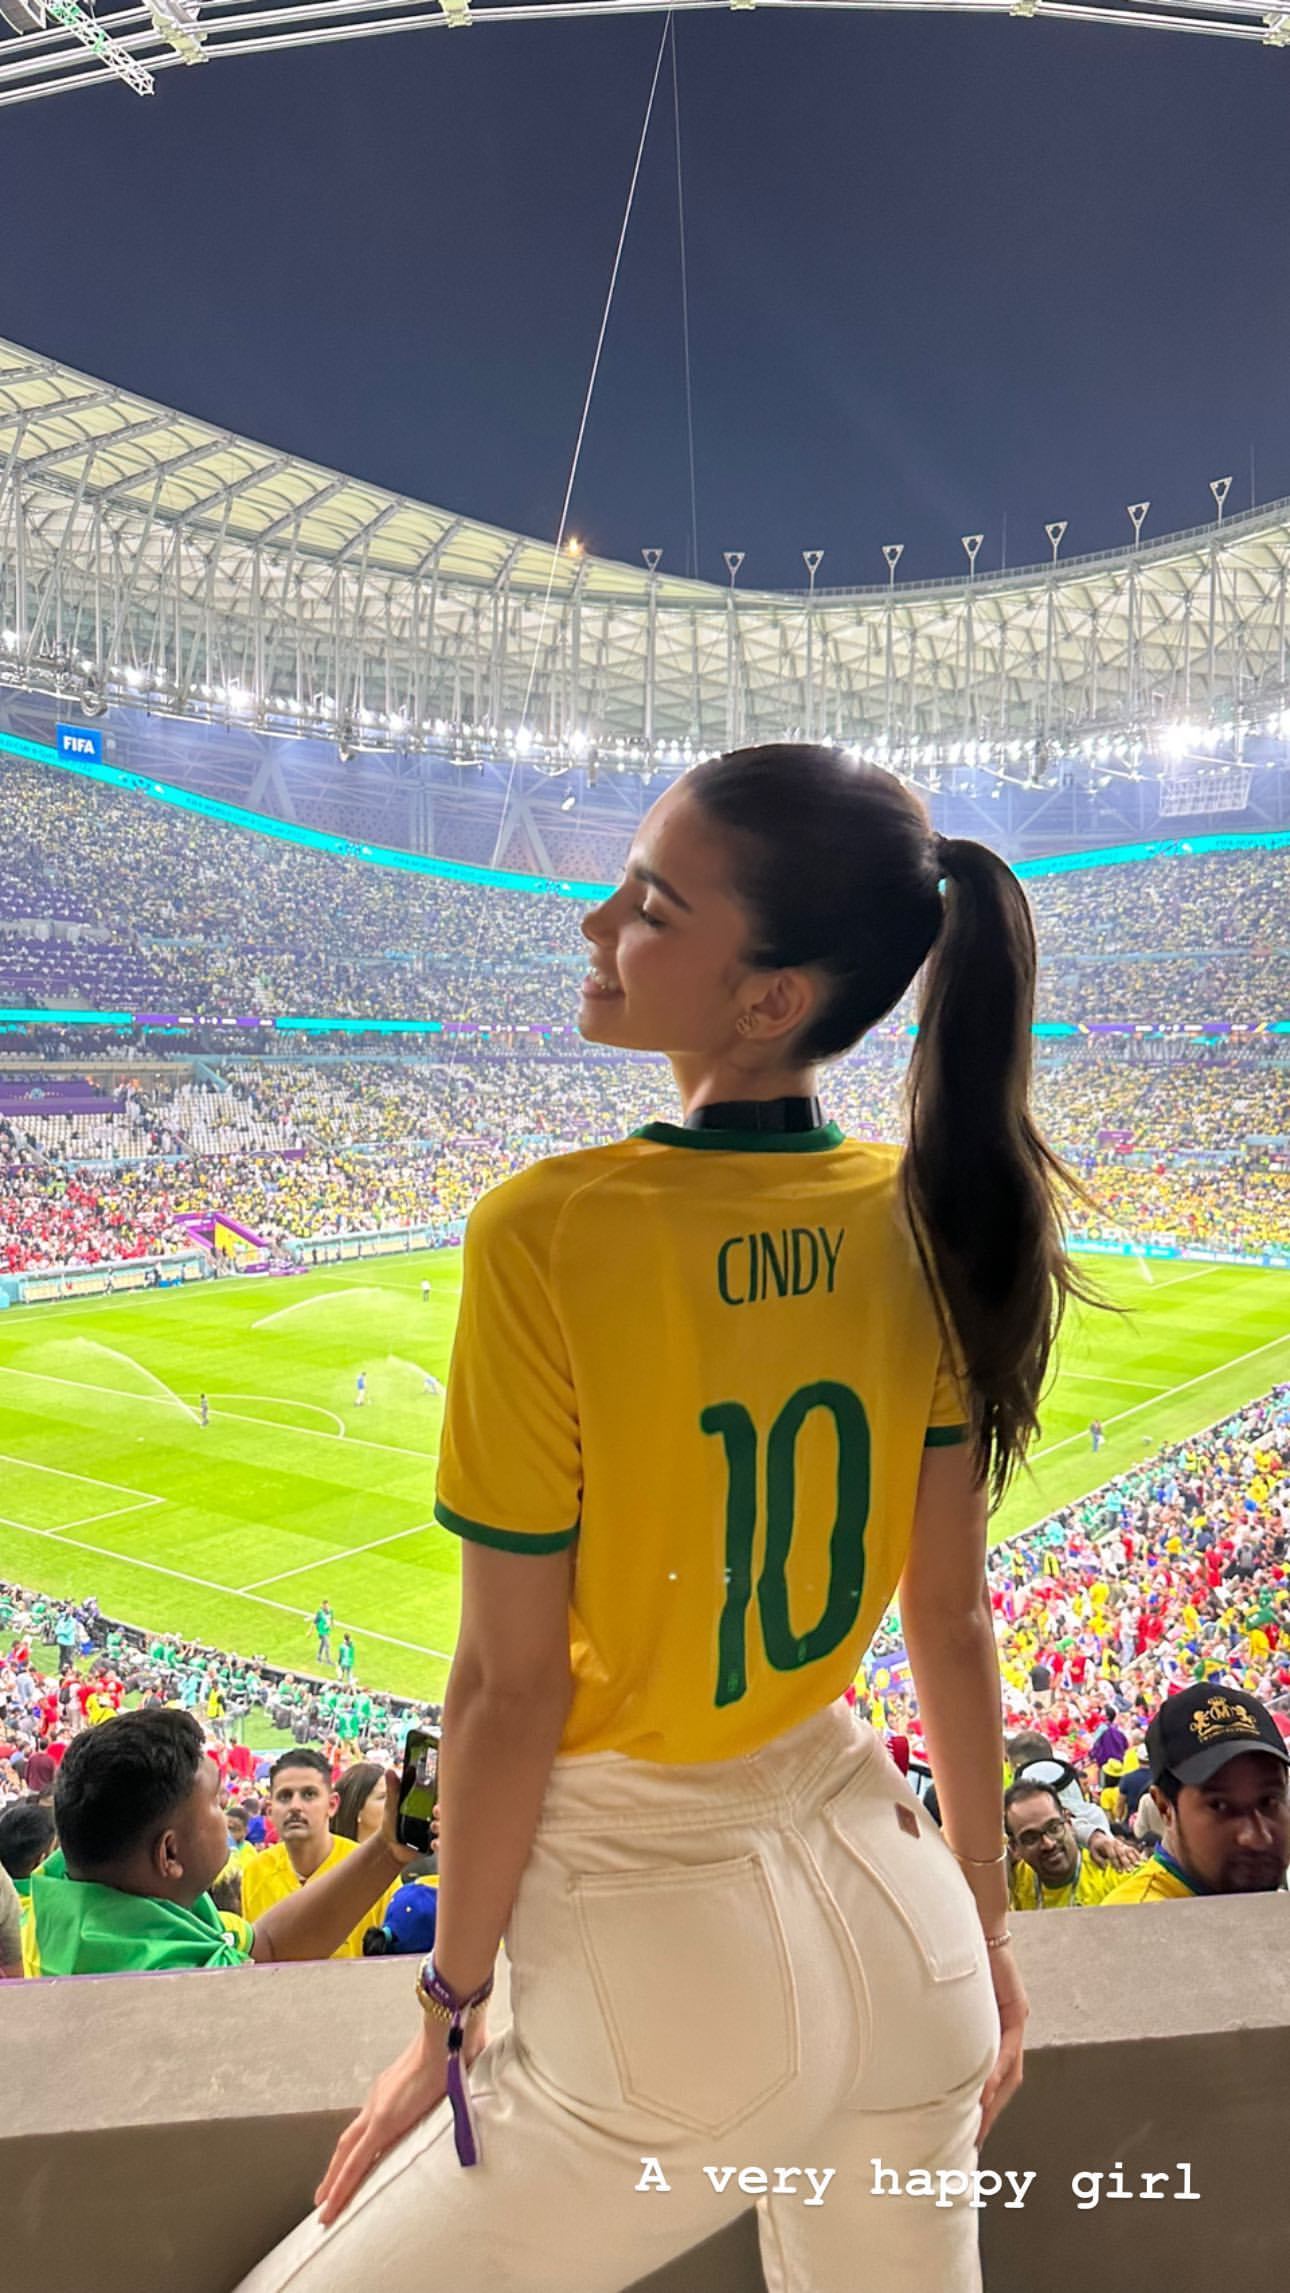 Model Cindy Mello is Rooting for Brazil! - Photo 2